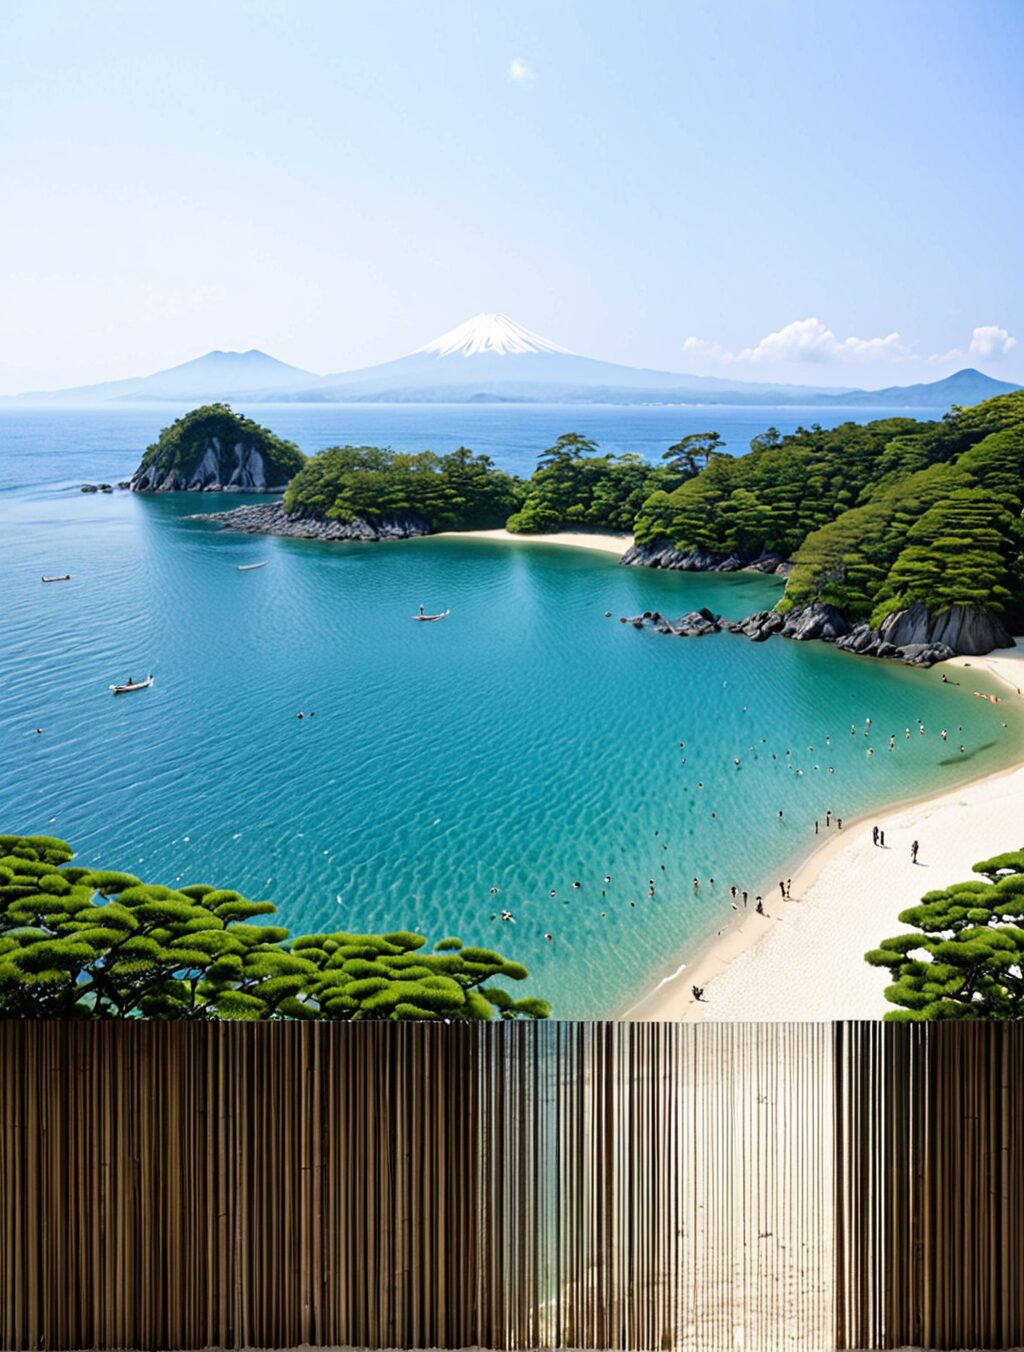 japan has no swimmable beaches cause and effect